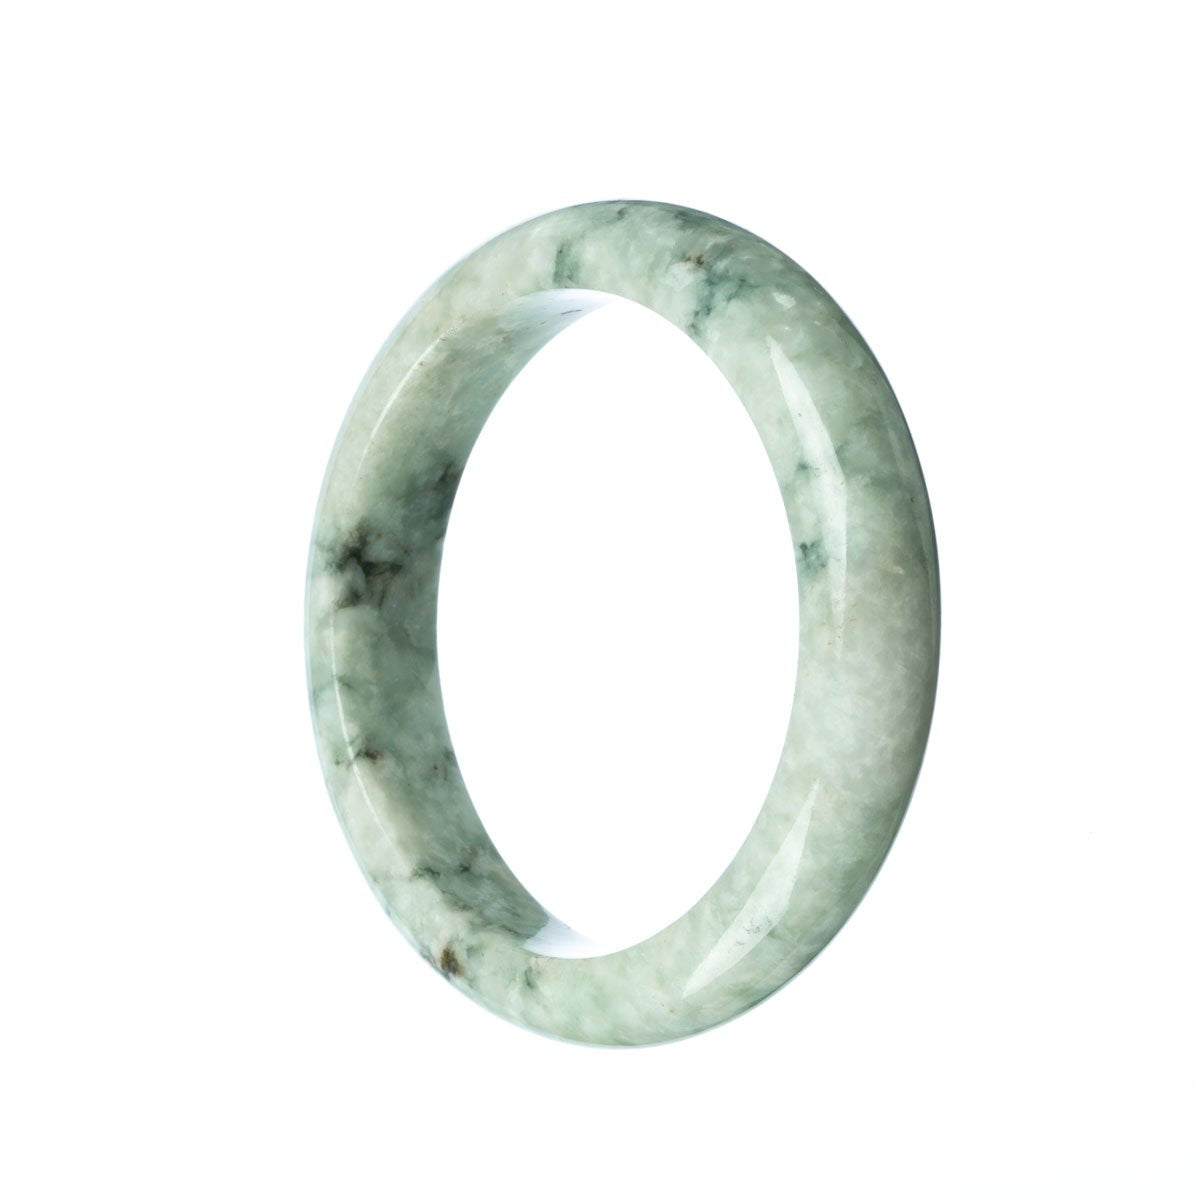 A pale green jadeite bangle with a semi-round shape, measuring 59mm in diameter.